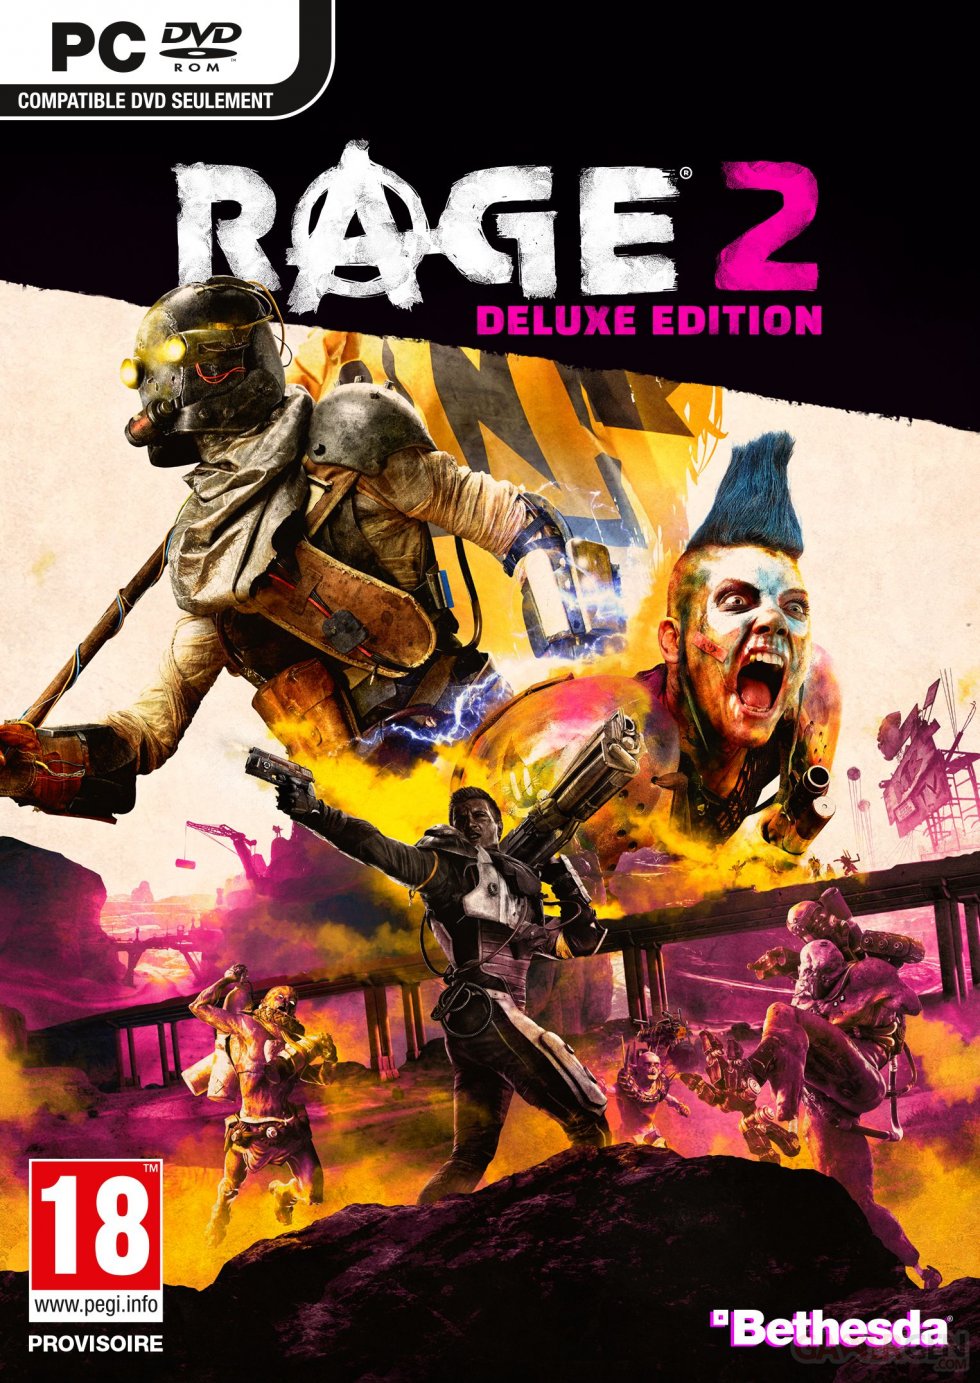 RAGE-2-jaquette-Deluxe-Edition-PC-11-06-2018